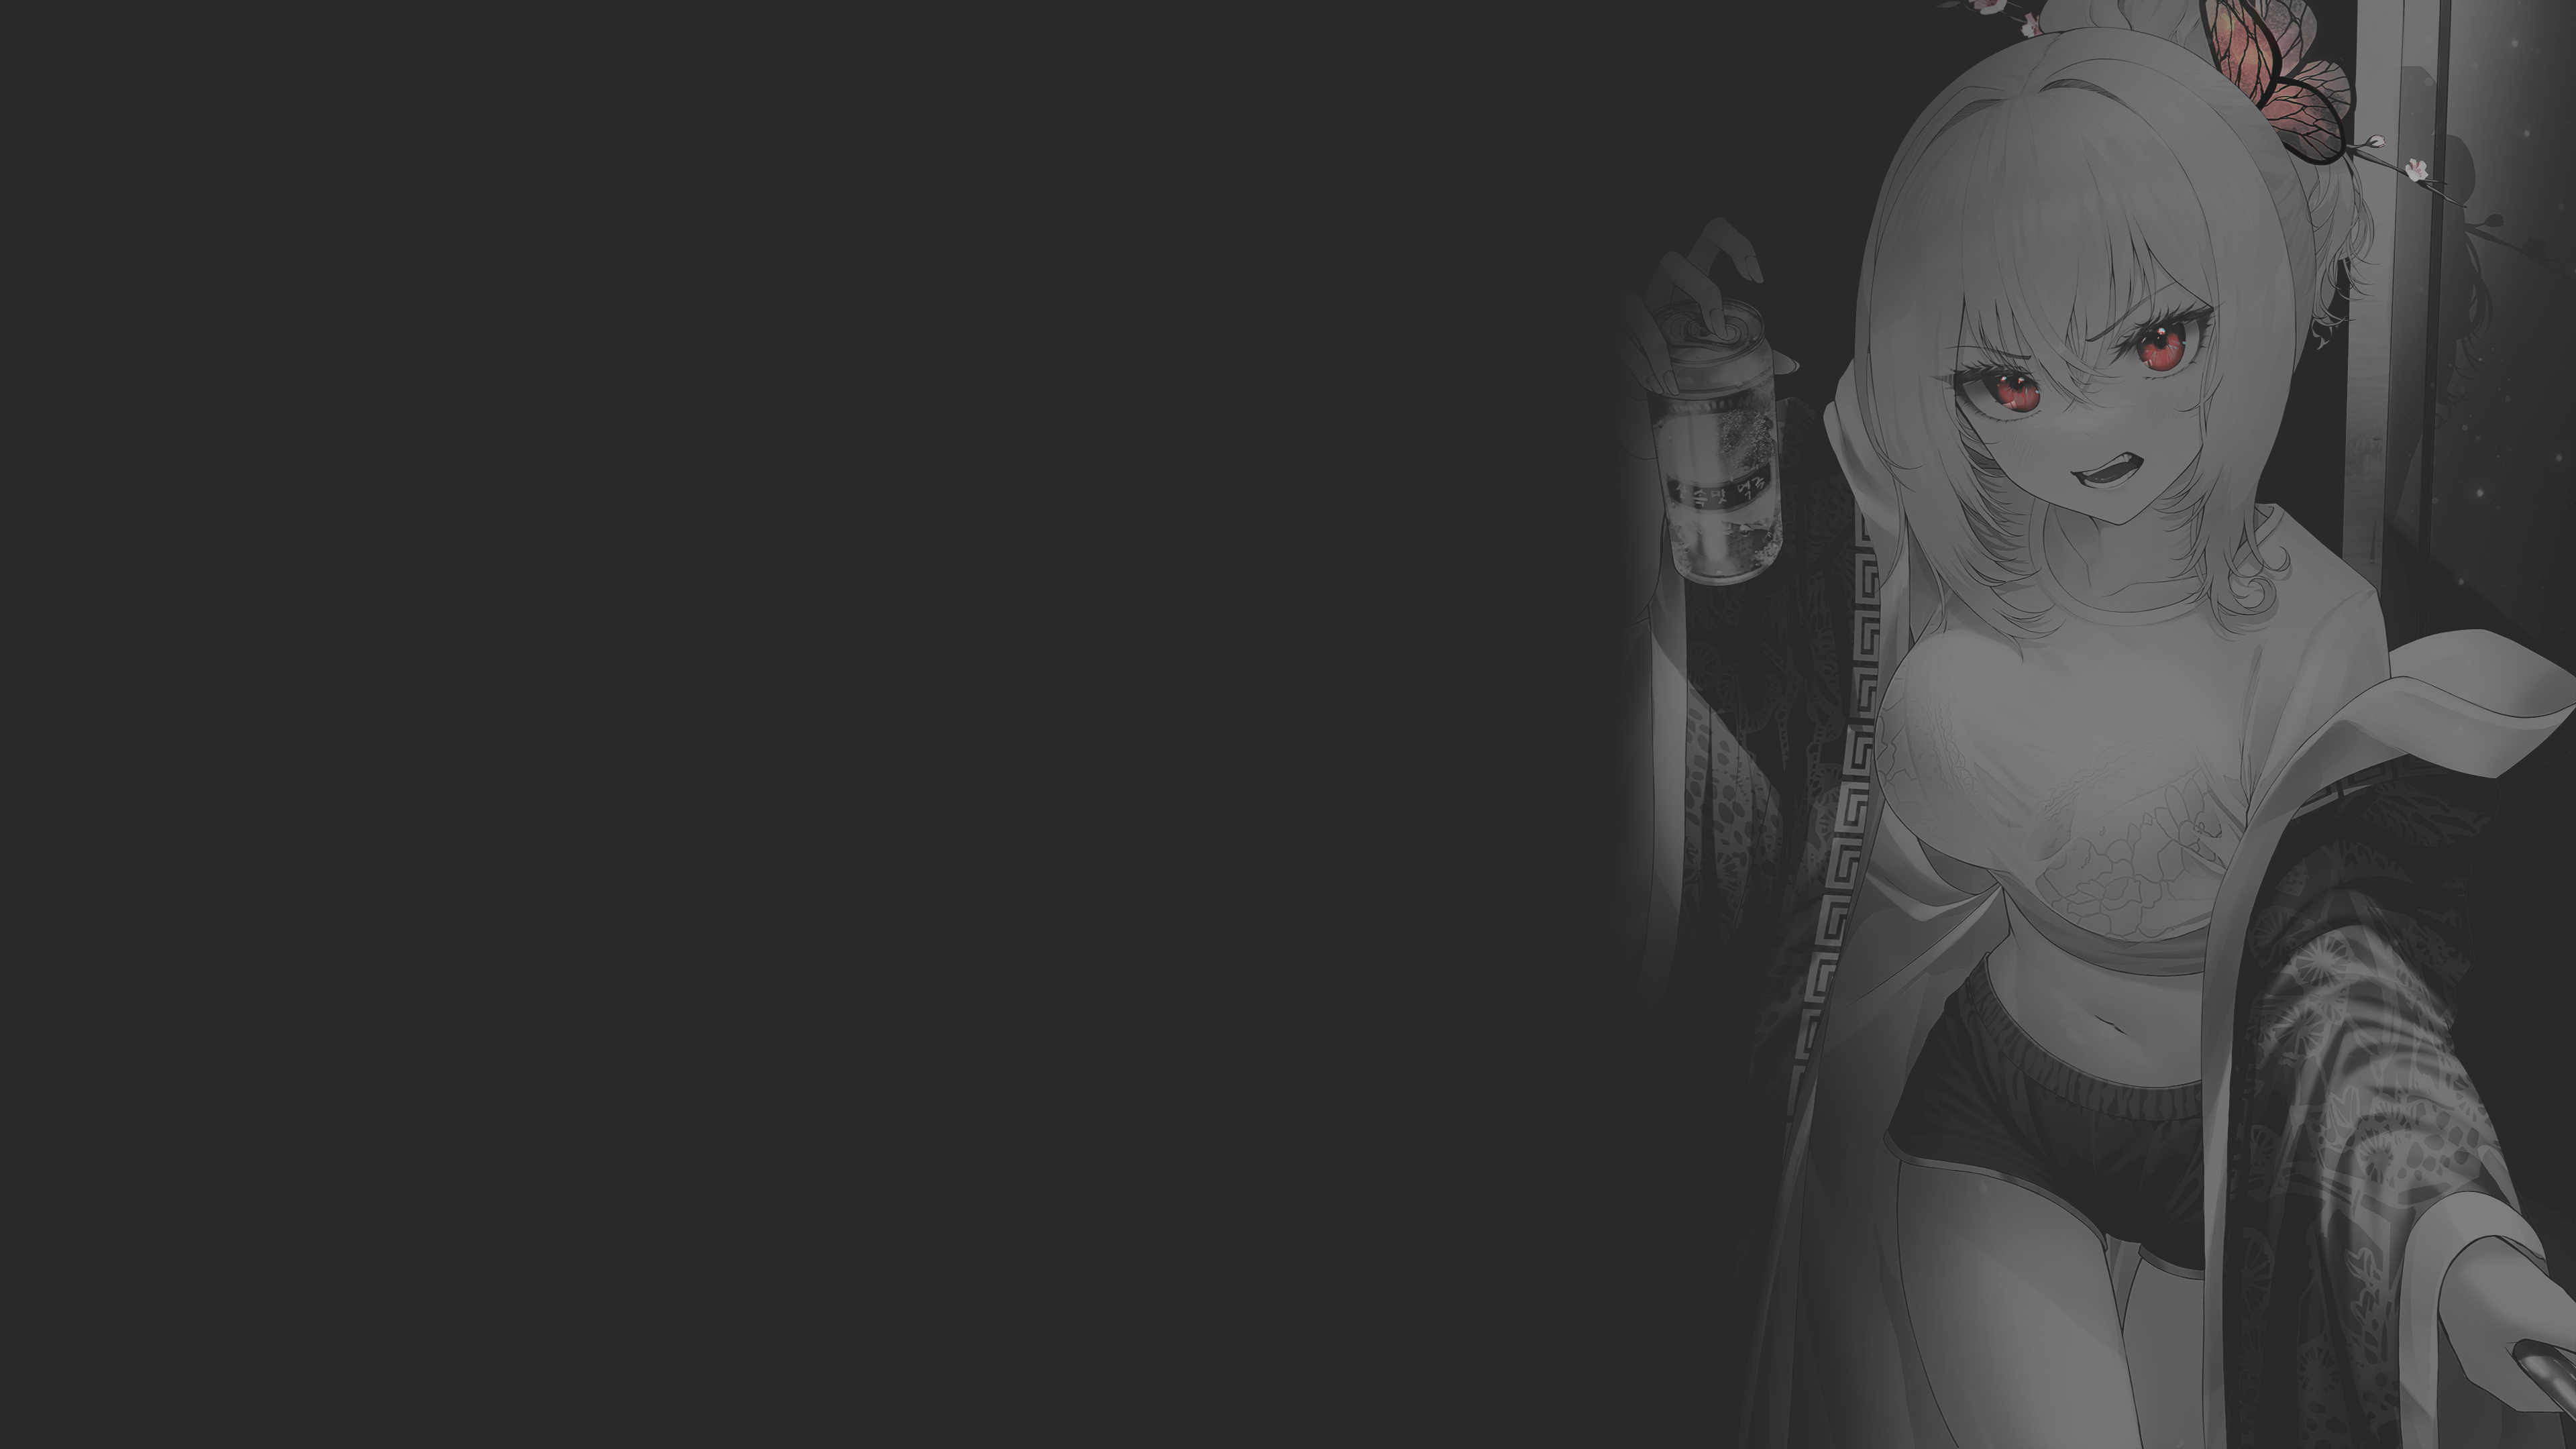 Anime 3840x2160 anime anime girls fan art illustration original characters monochrome dark background alcohol beer butterfly selective coloring Zain (artist) door red eyes short shorts